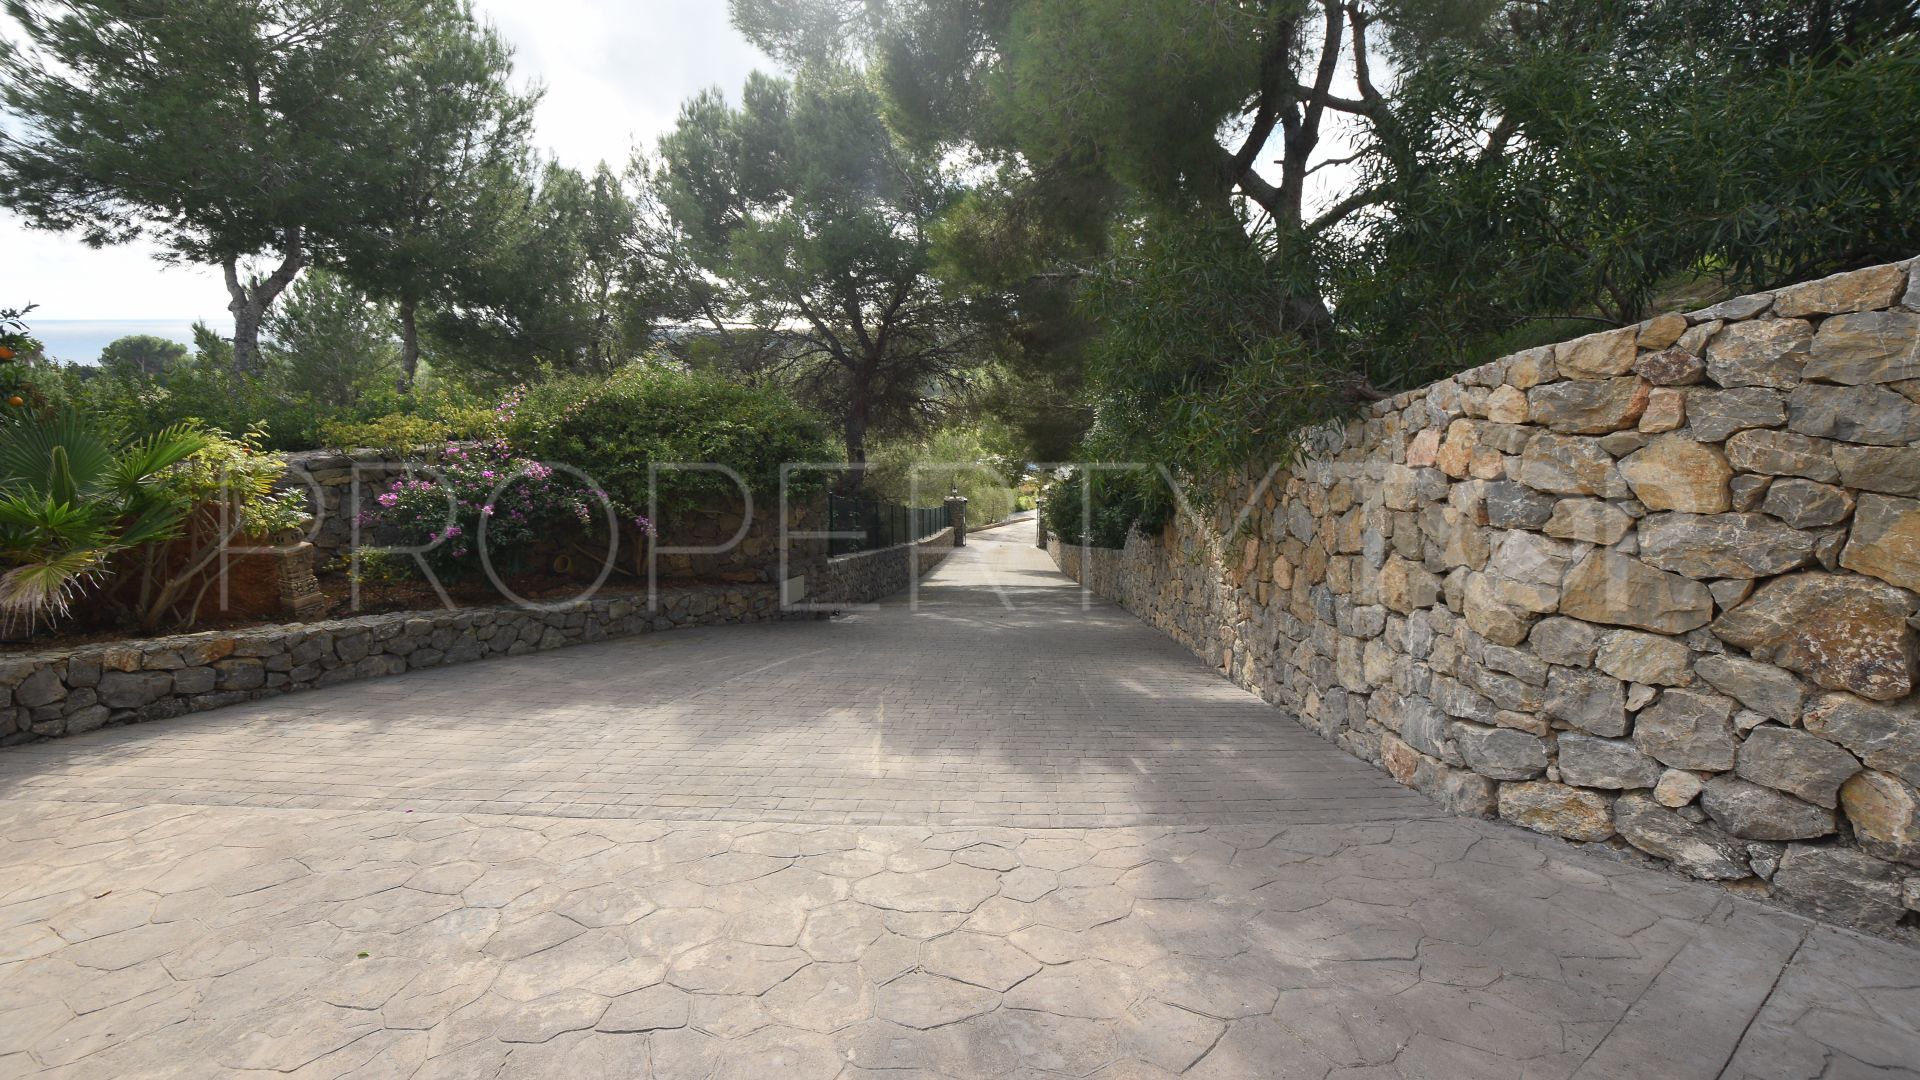 For sale chalet in Santa Eulalia del Río with 5 bedrooms